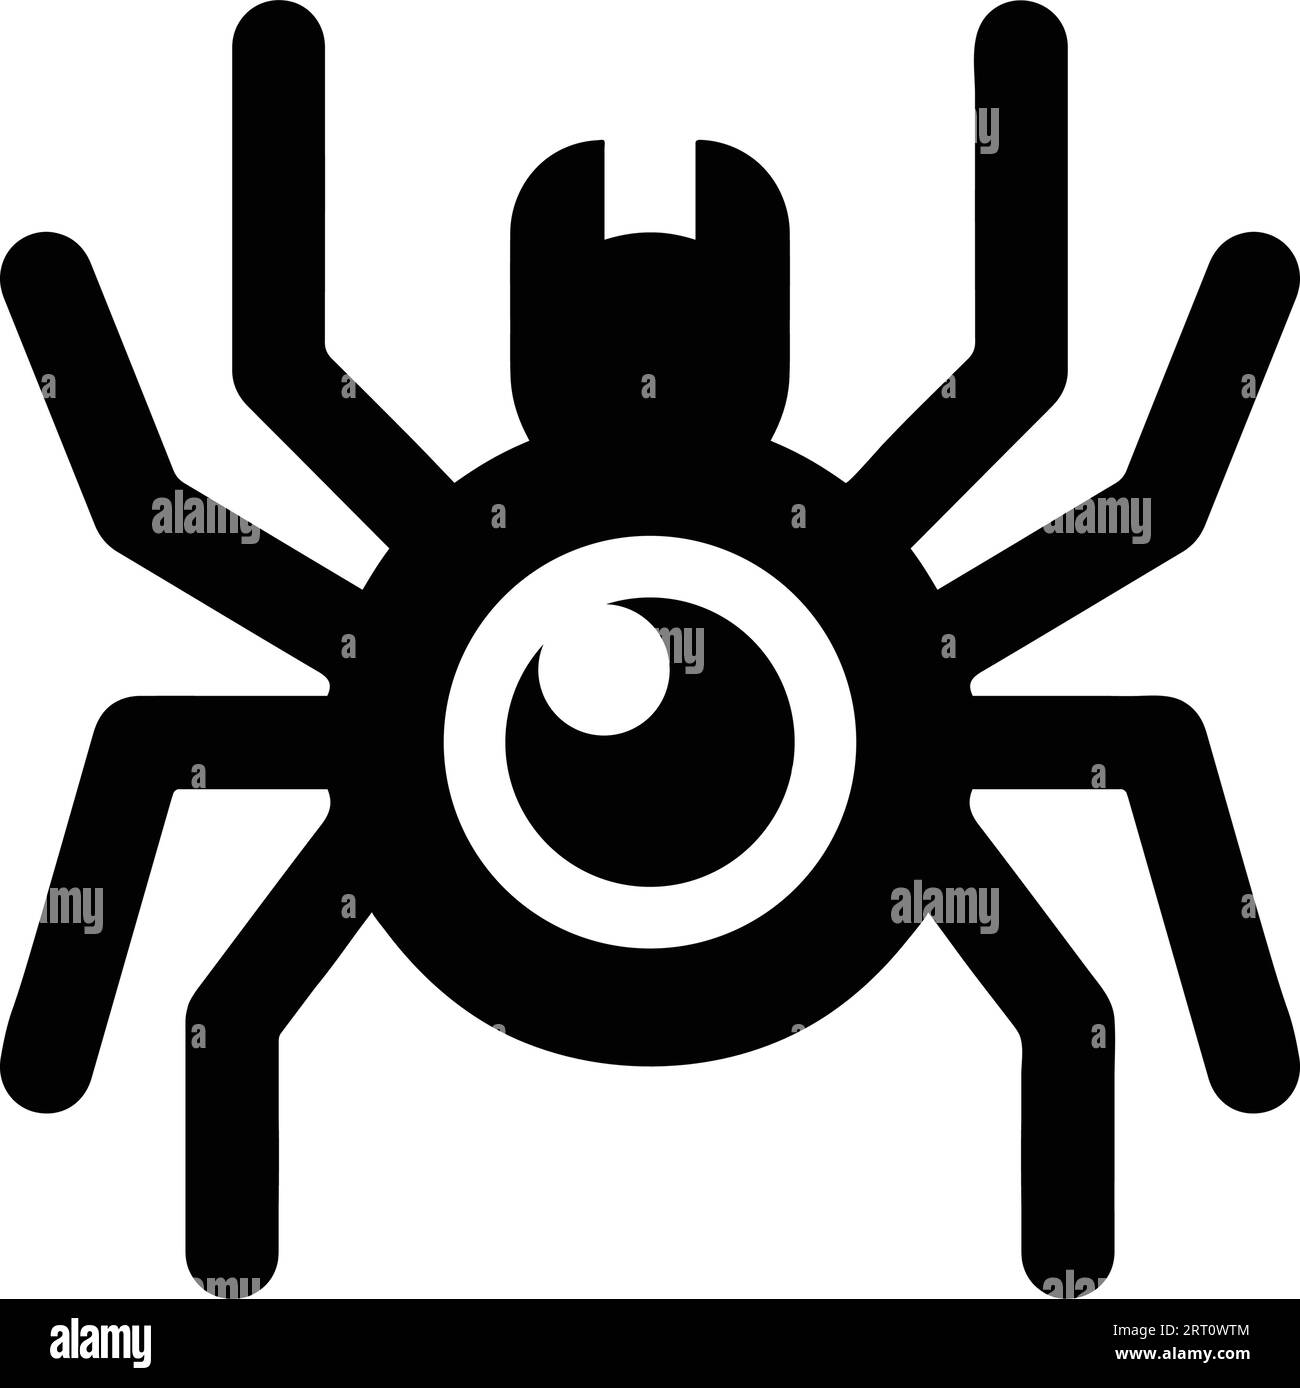 Spider Tool icon. Fully editable vector EPS use for printed materials and infographics, web or any kind of design project. Stock Vector